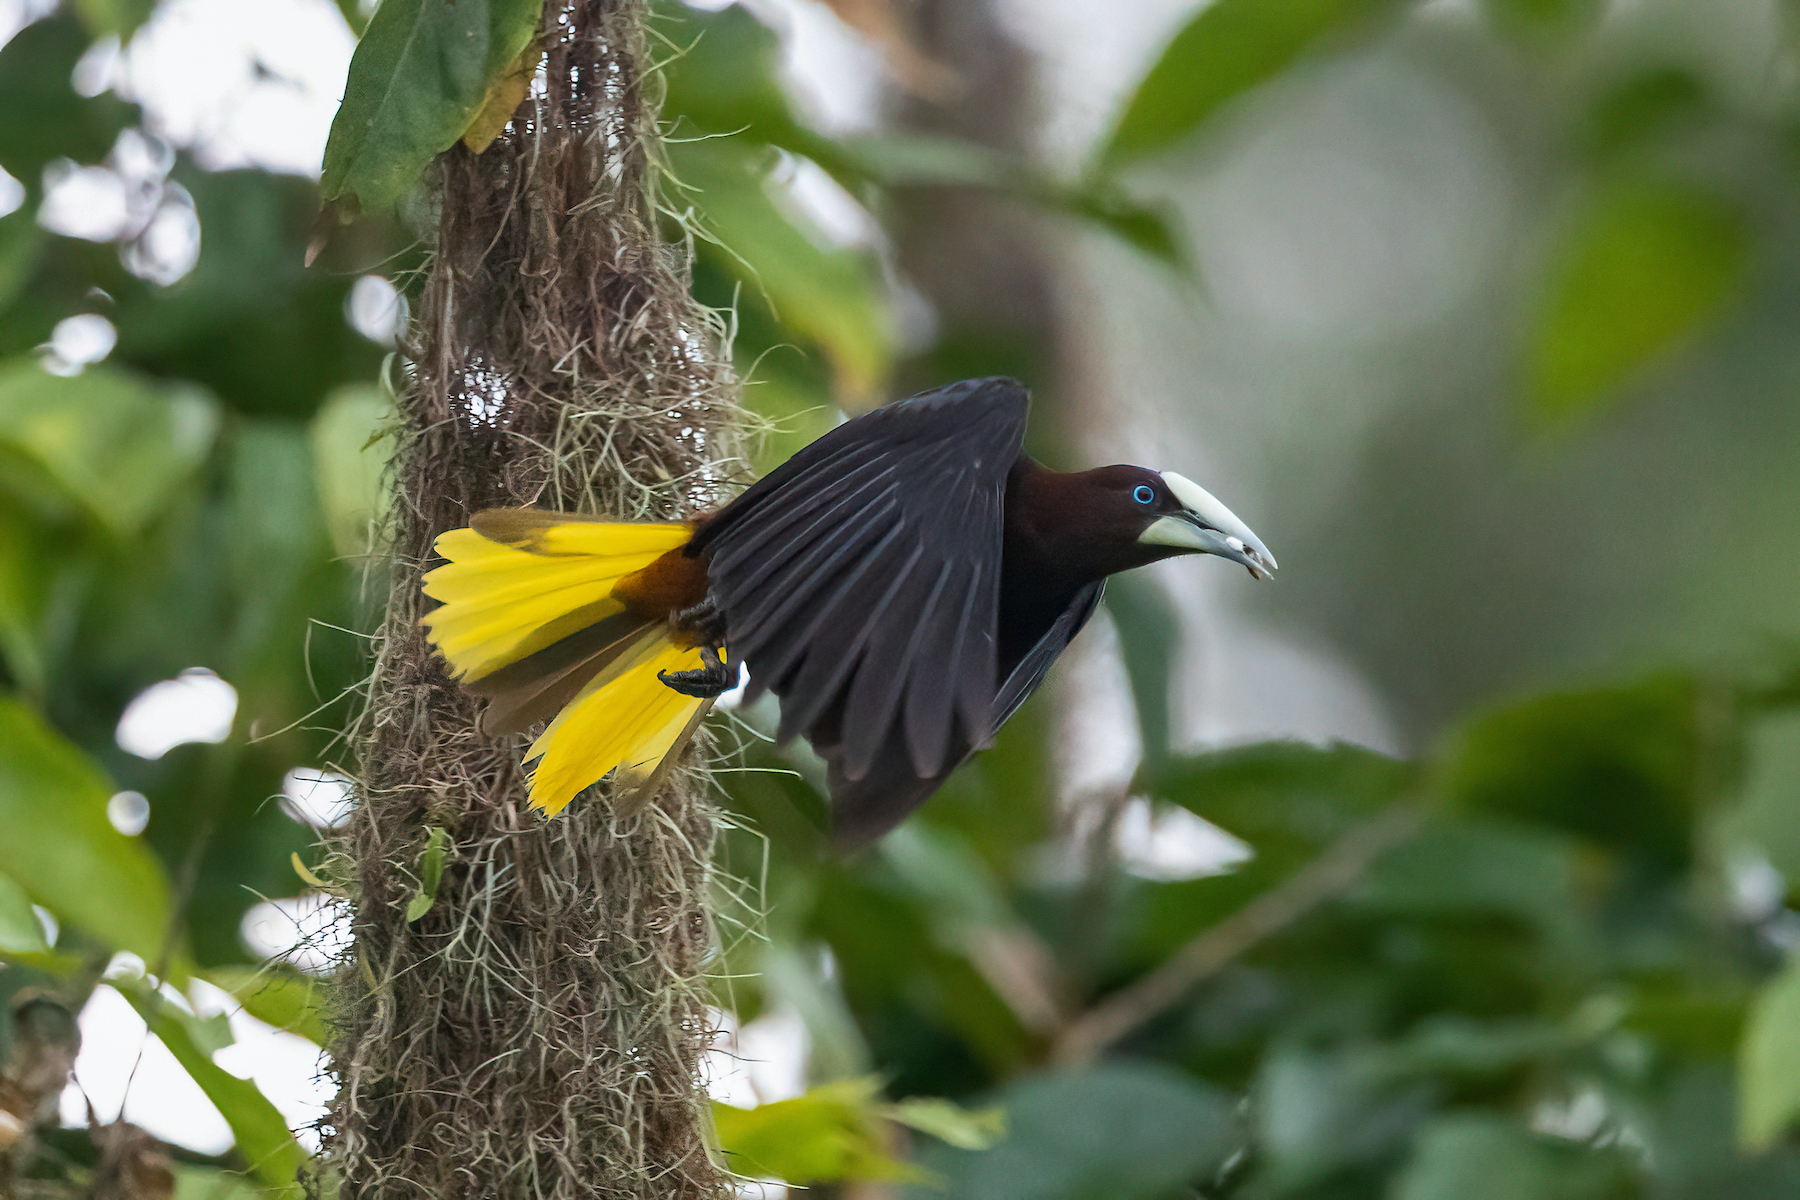 A Chestnut-headed Oropendola flying with food for its chick on our Costa Rica wildlife photography tour